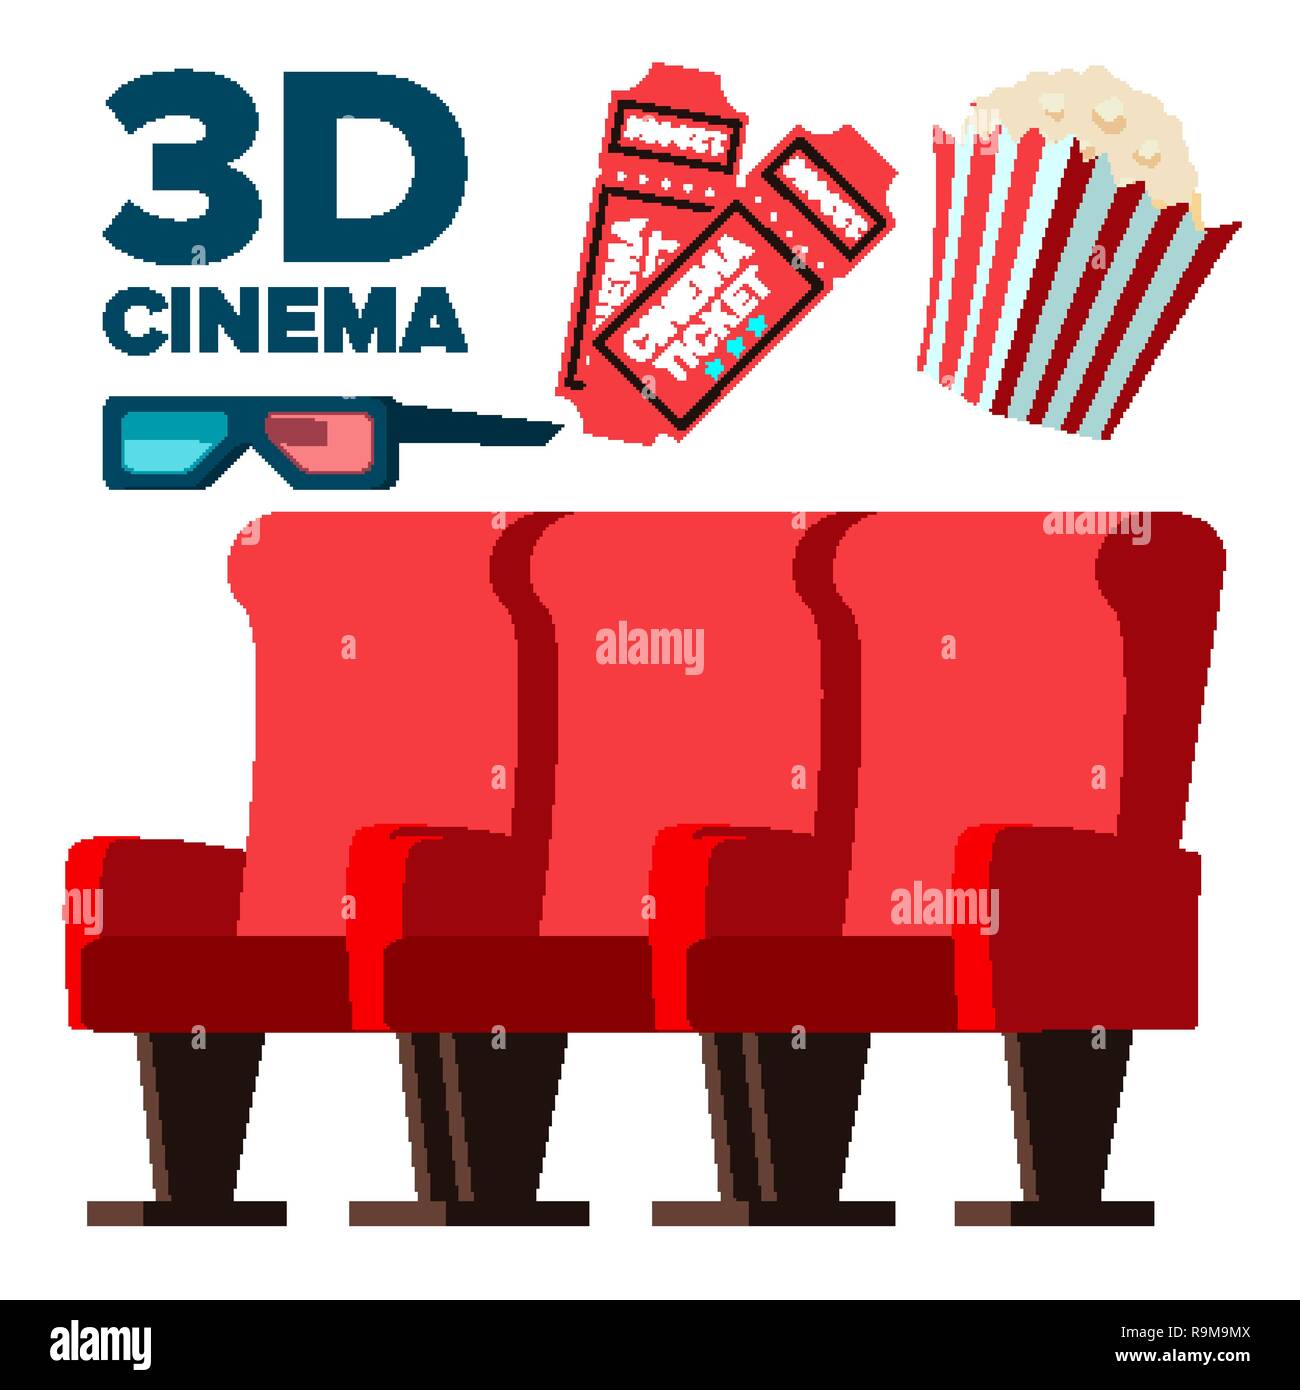 3D Cinema Icons Vector. Popcorn, Red Seats, Tickets, Stereo Glasses. Isolated Cartoon Illustration Stock Vector